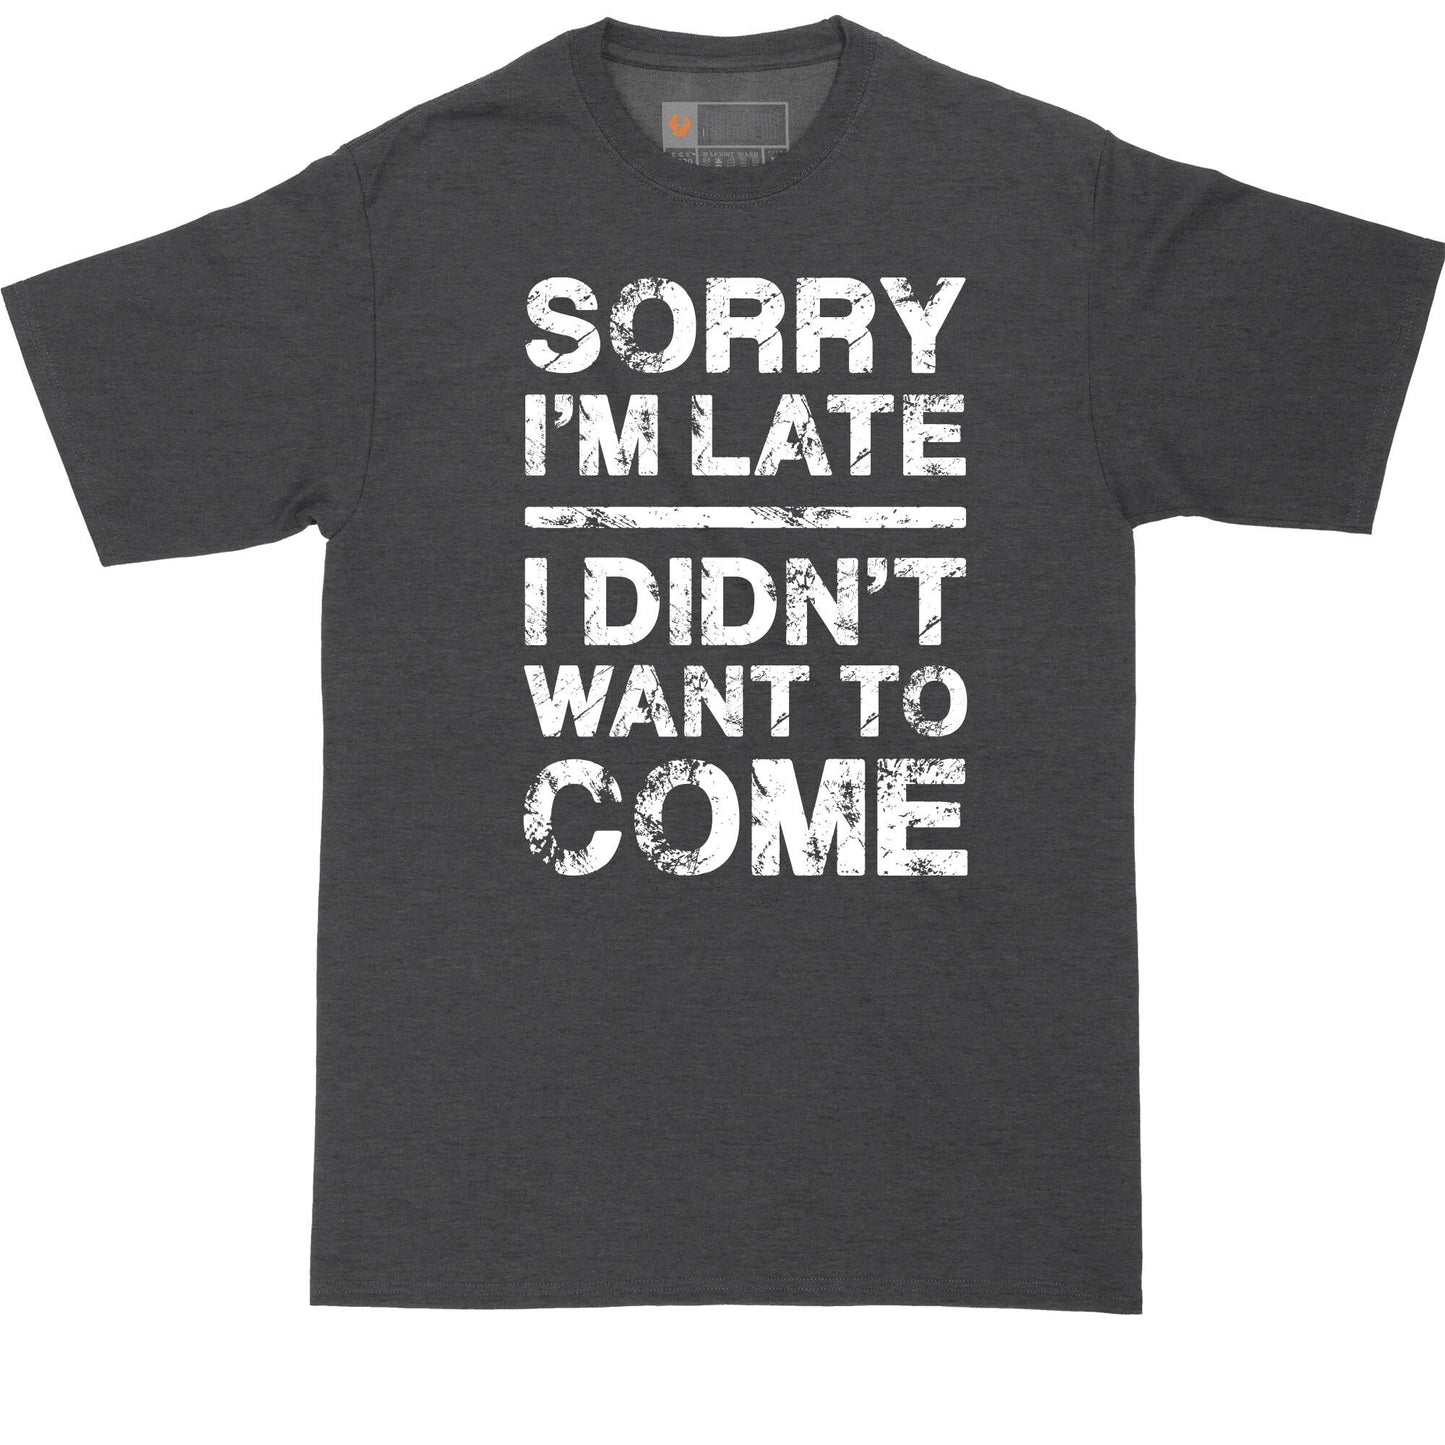 Big and Tall Men | Sorry I'm Late I Didn't Want to Come | Mens Big and Tall Graphic T-Shirt | Shirts for Big Guys